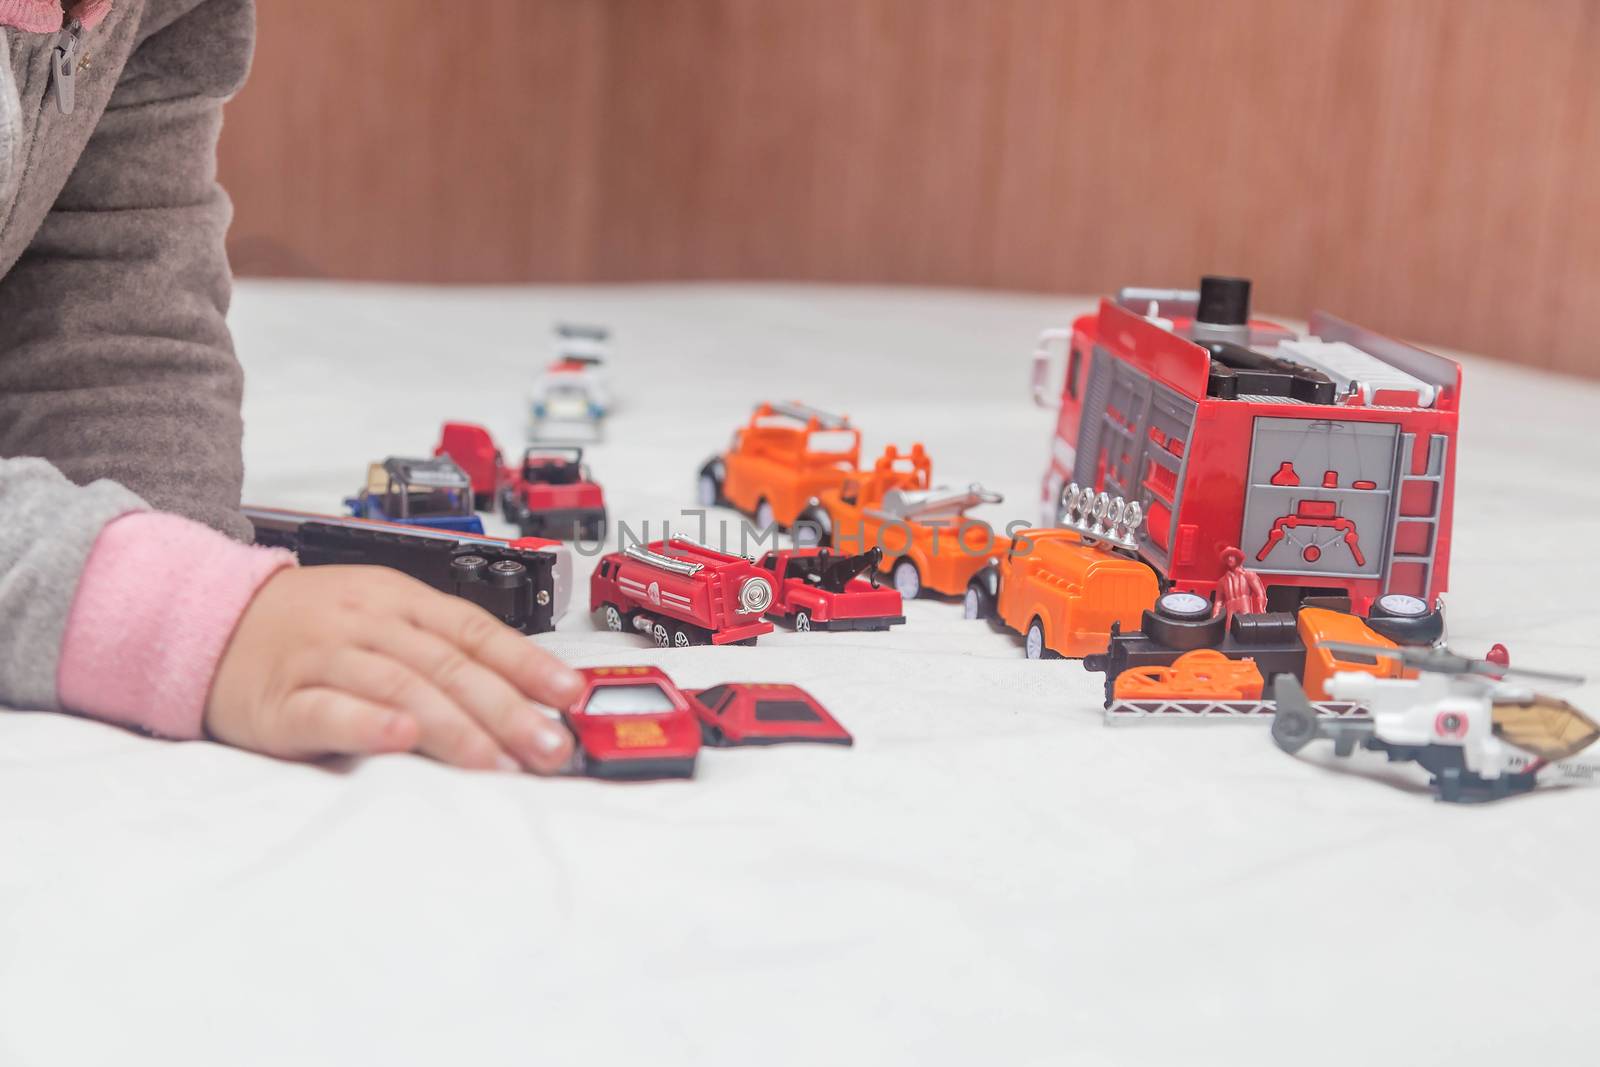 A child plays with cars that he just received as a gift by galinasharapova